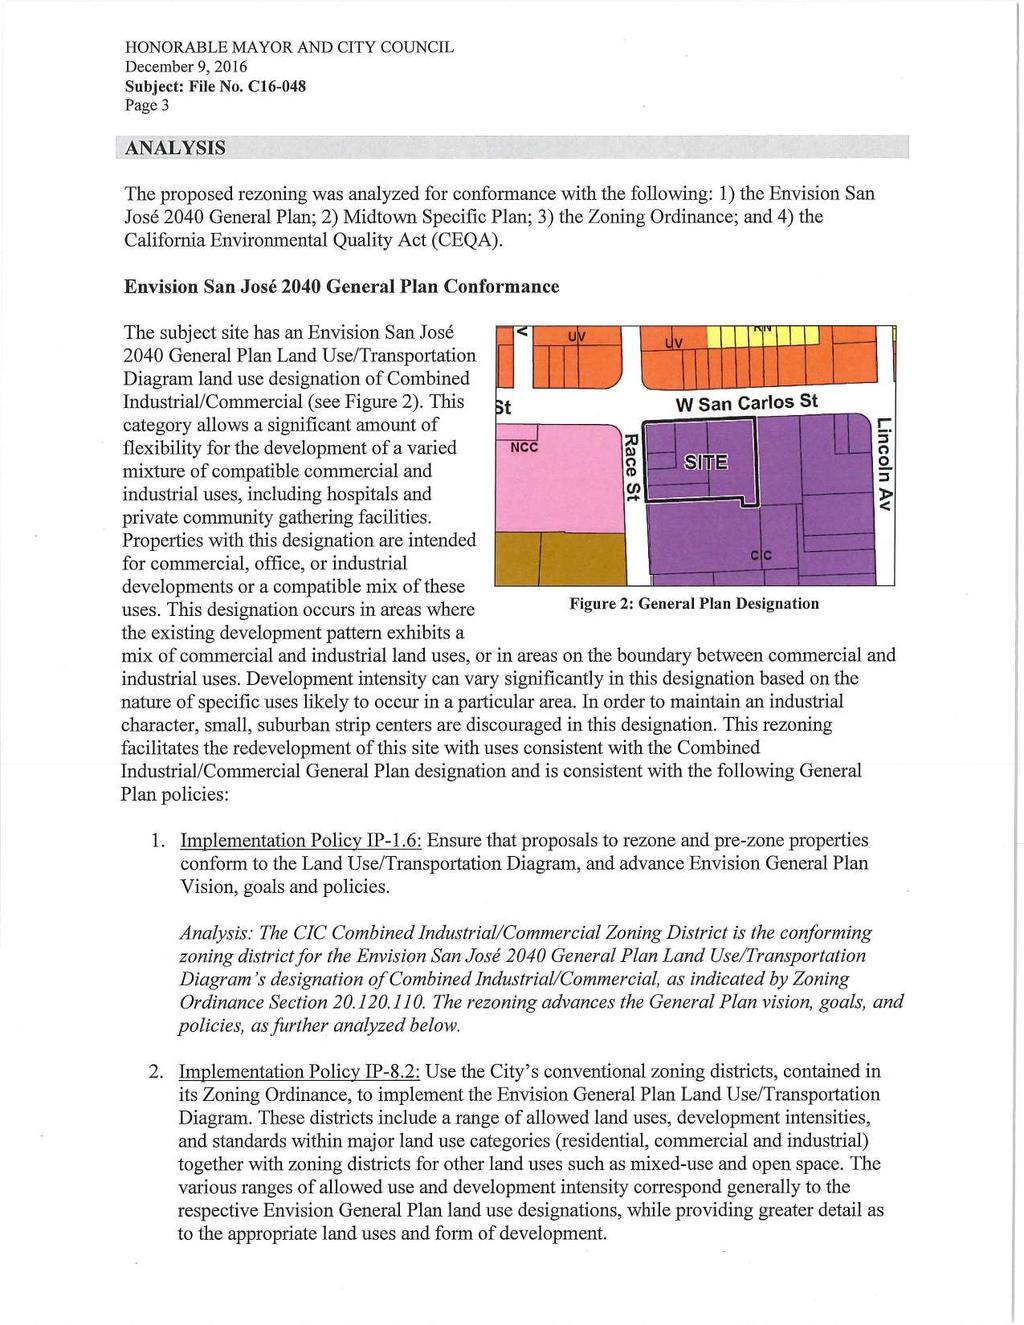 December 9, 2016 Page 3 ANALYSIS The proposed rezoning was analyzed for conformance with the following: 1) the Envision San Jose 2040 General Plan; 2) Midtown Specific Plan; 3) the Zoning Ordinance;